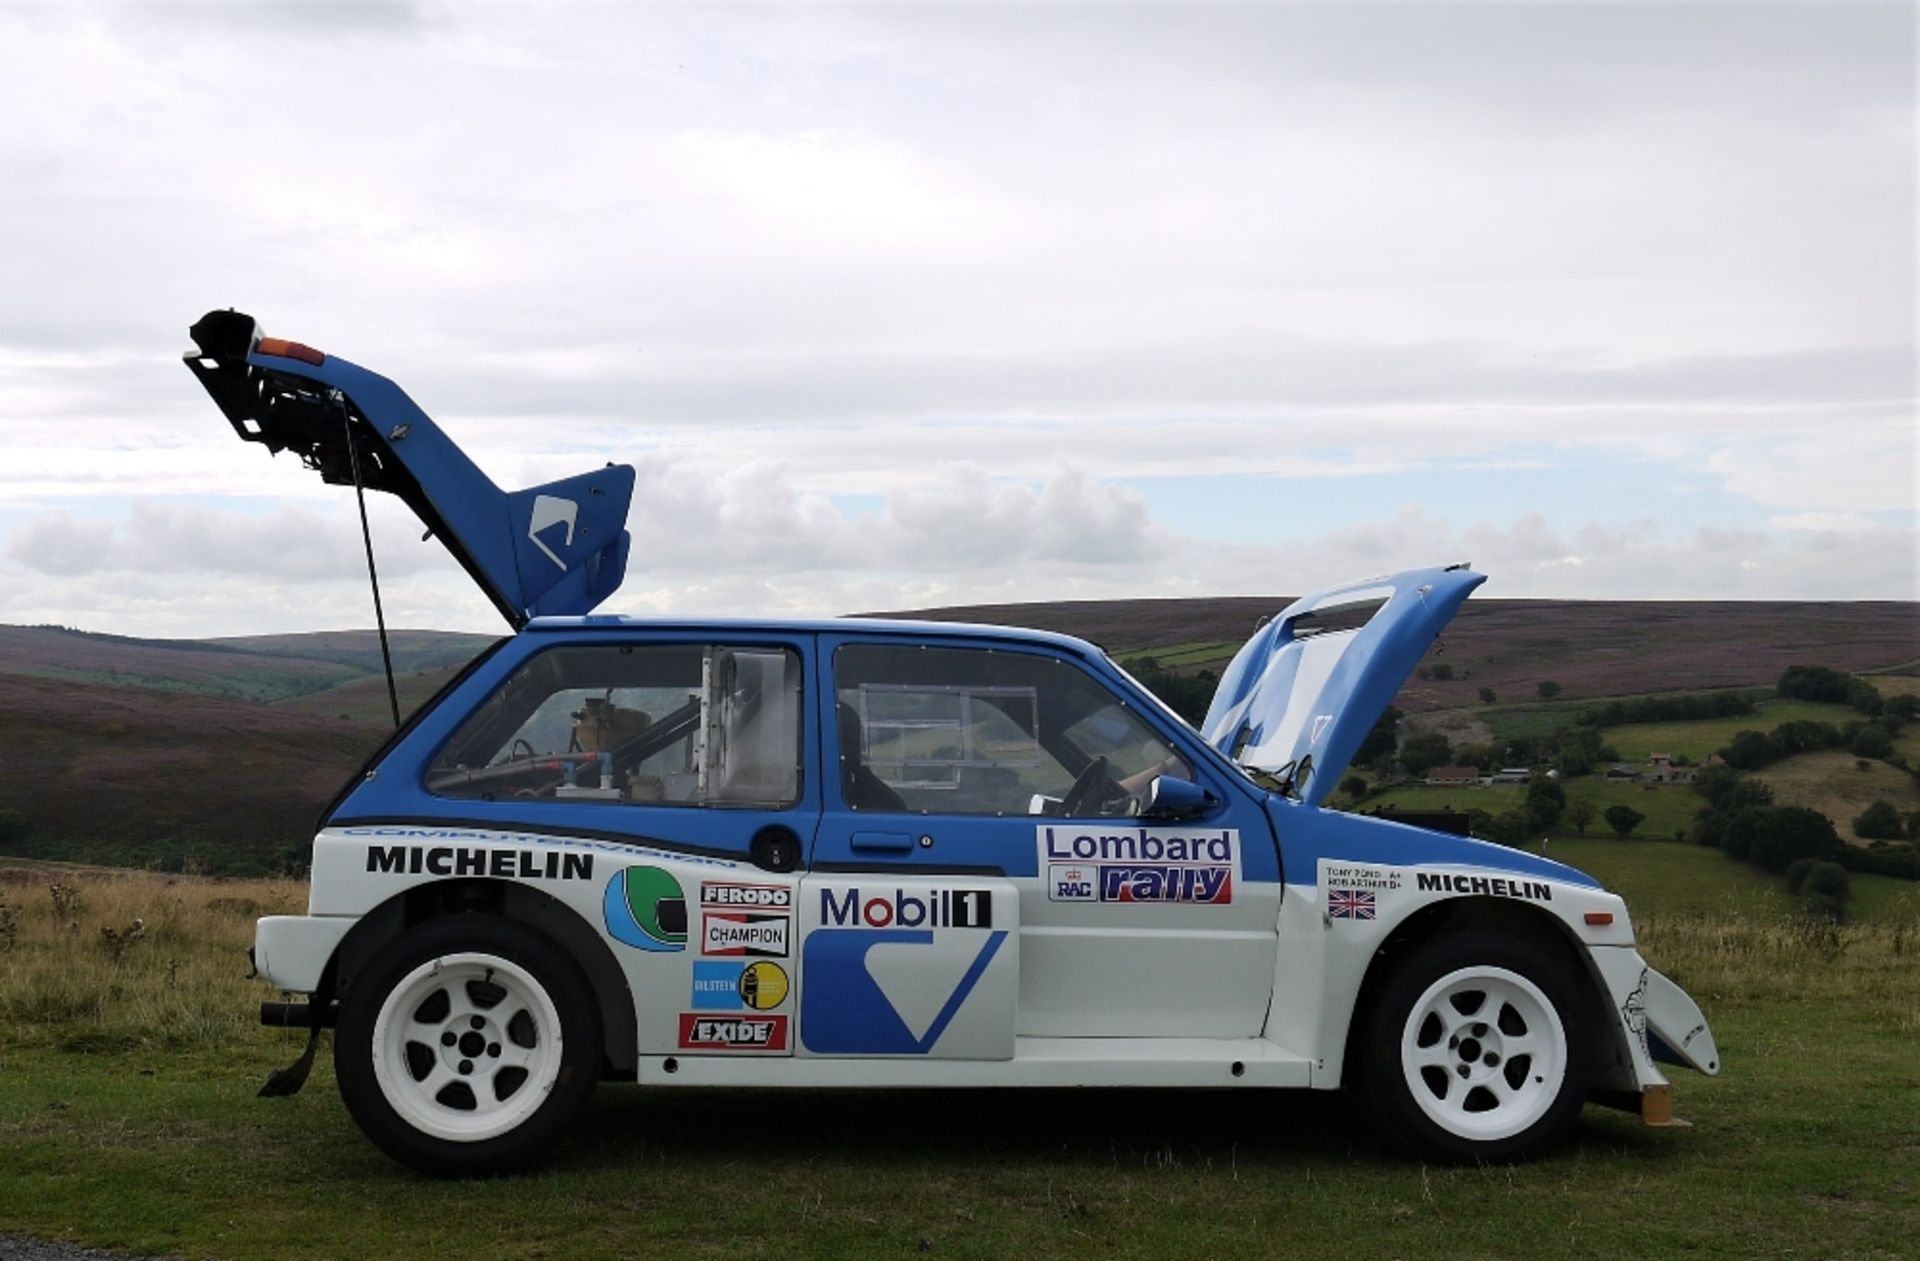 1985 MG Metro 6R4 Works Rally Car Registration Number: C874 EUD Chassis Number: #134  The MG Metro - Image 17 of 31